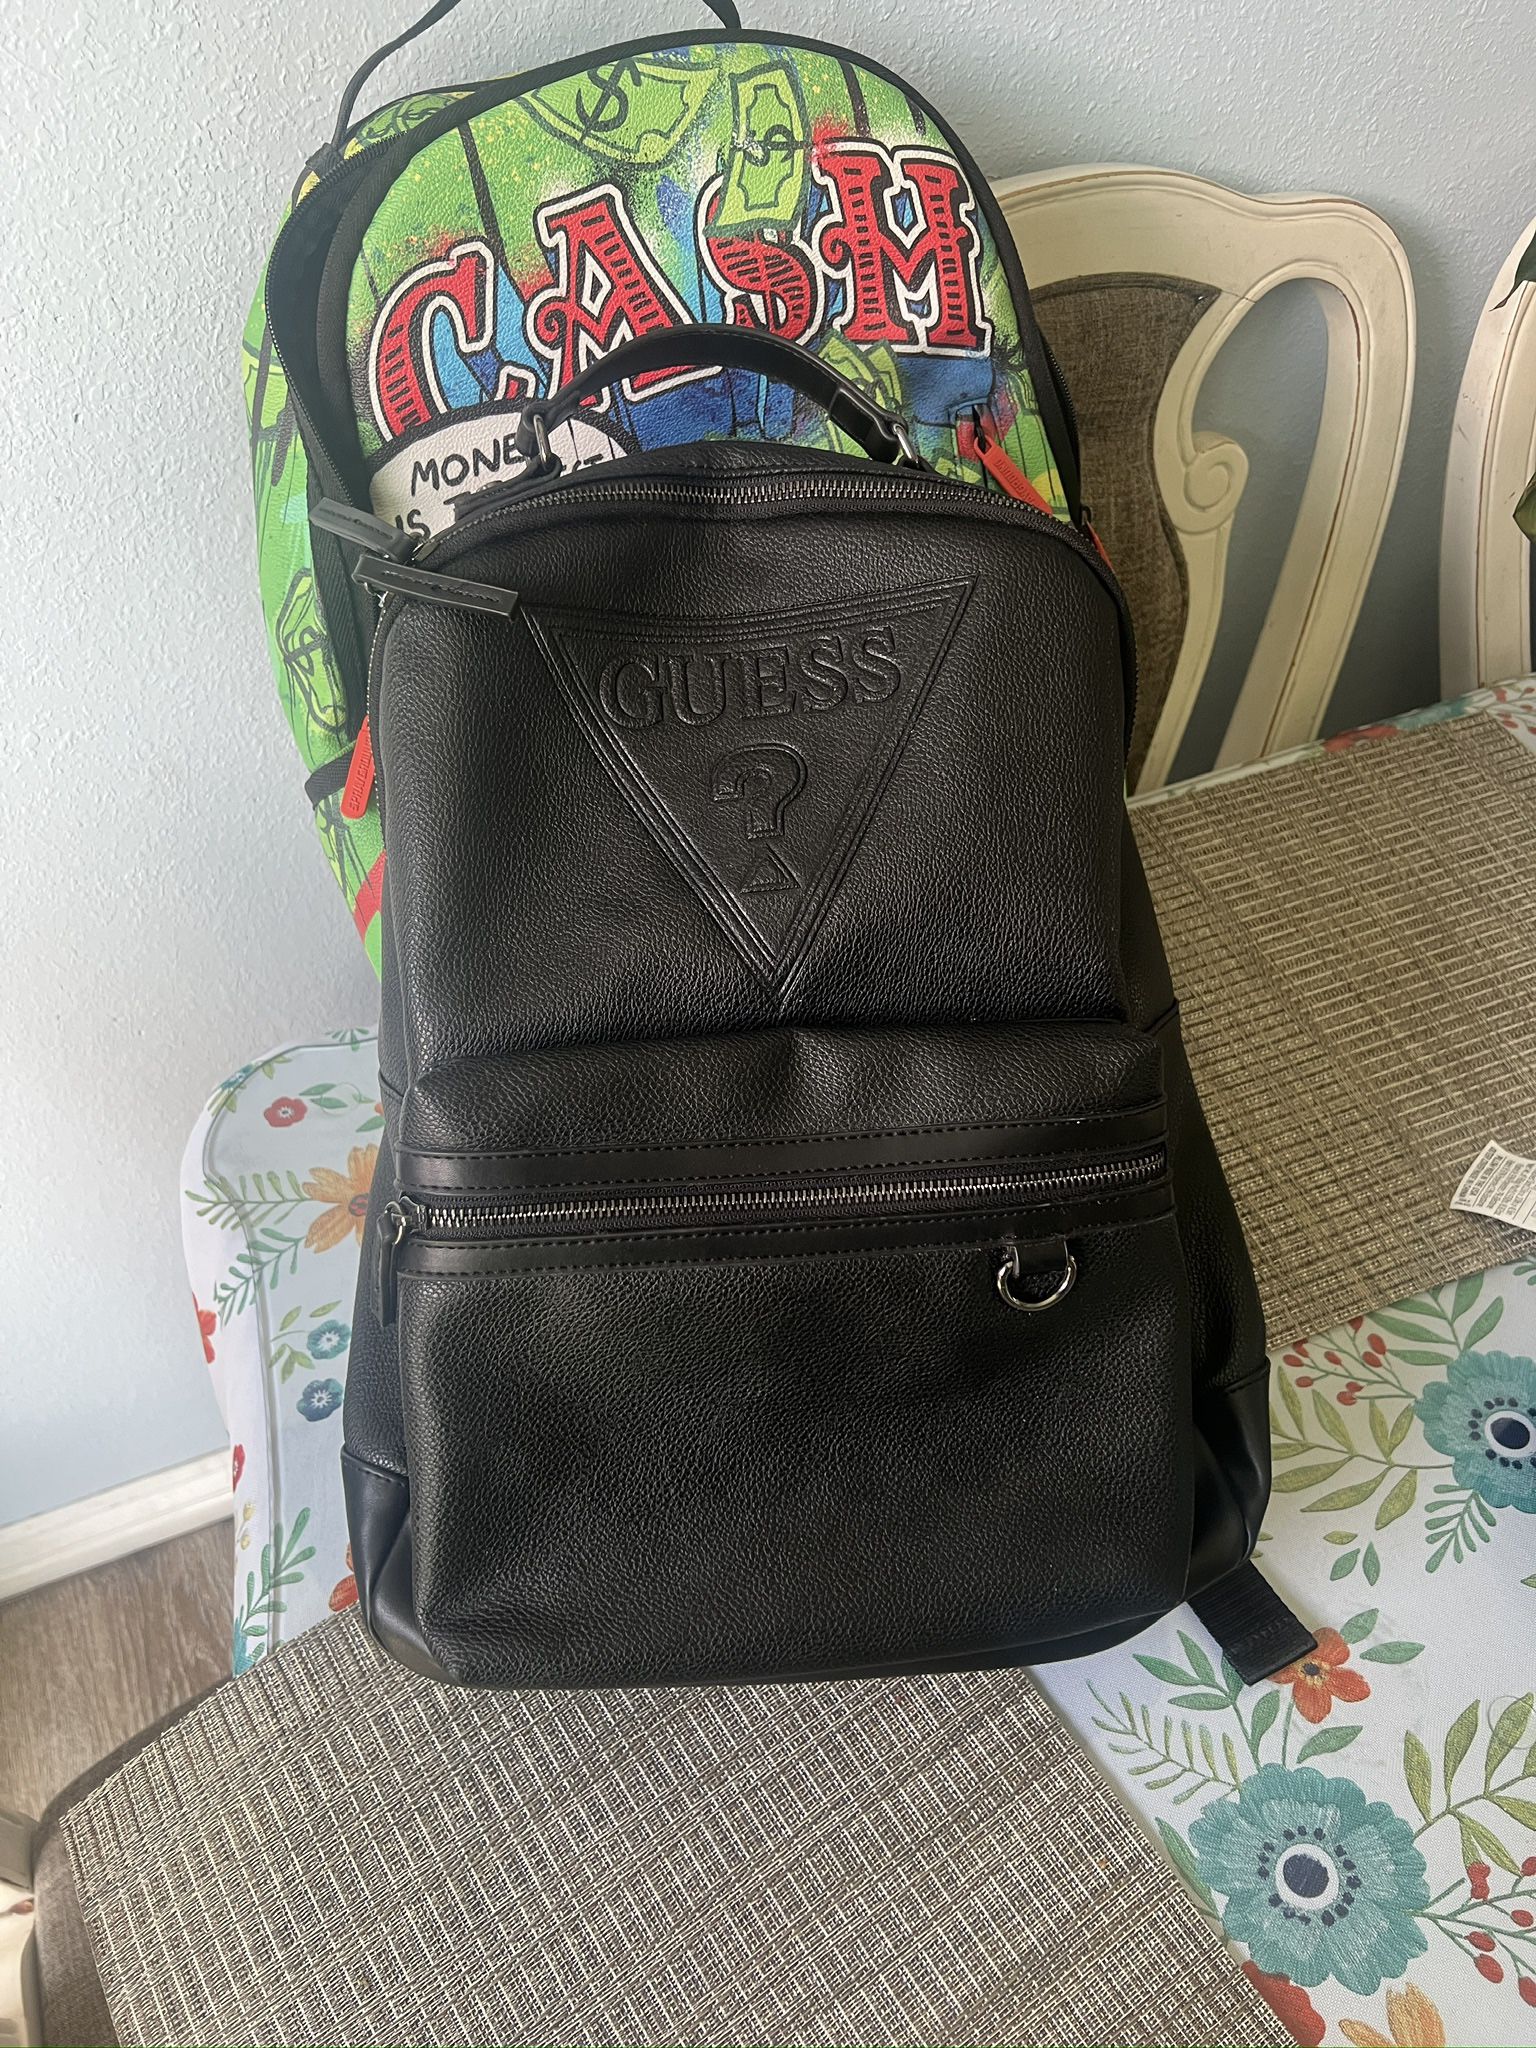 Black Leather Guess Backpack 